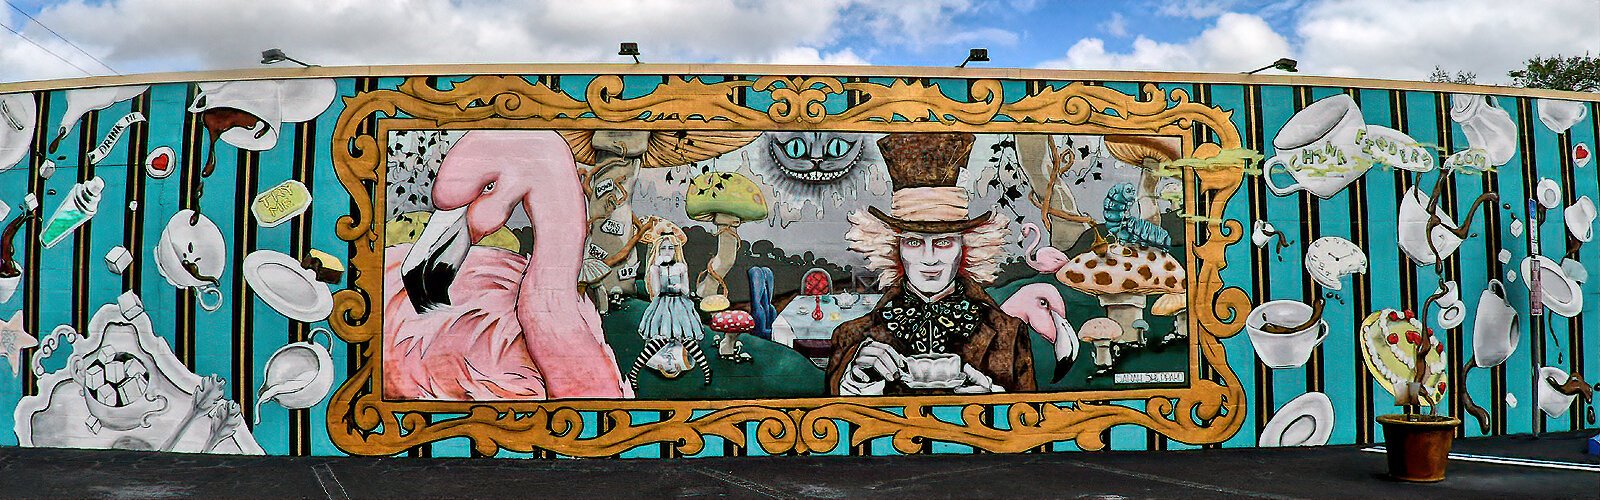 A very striking mural in the Grand Central District, the "Mad Hatter’s Tea Party" by Sarah Sheppard, was inspired by "Alice in Wonderland." It was commissioned especially by the dinnerware store China Finders and covers one side of their store.